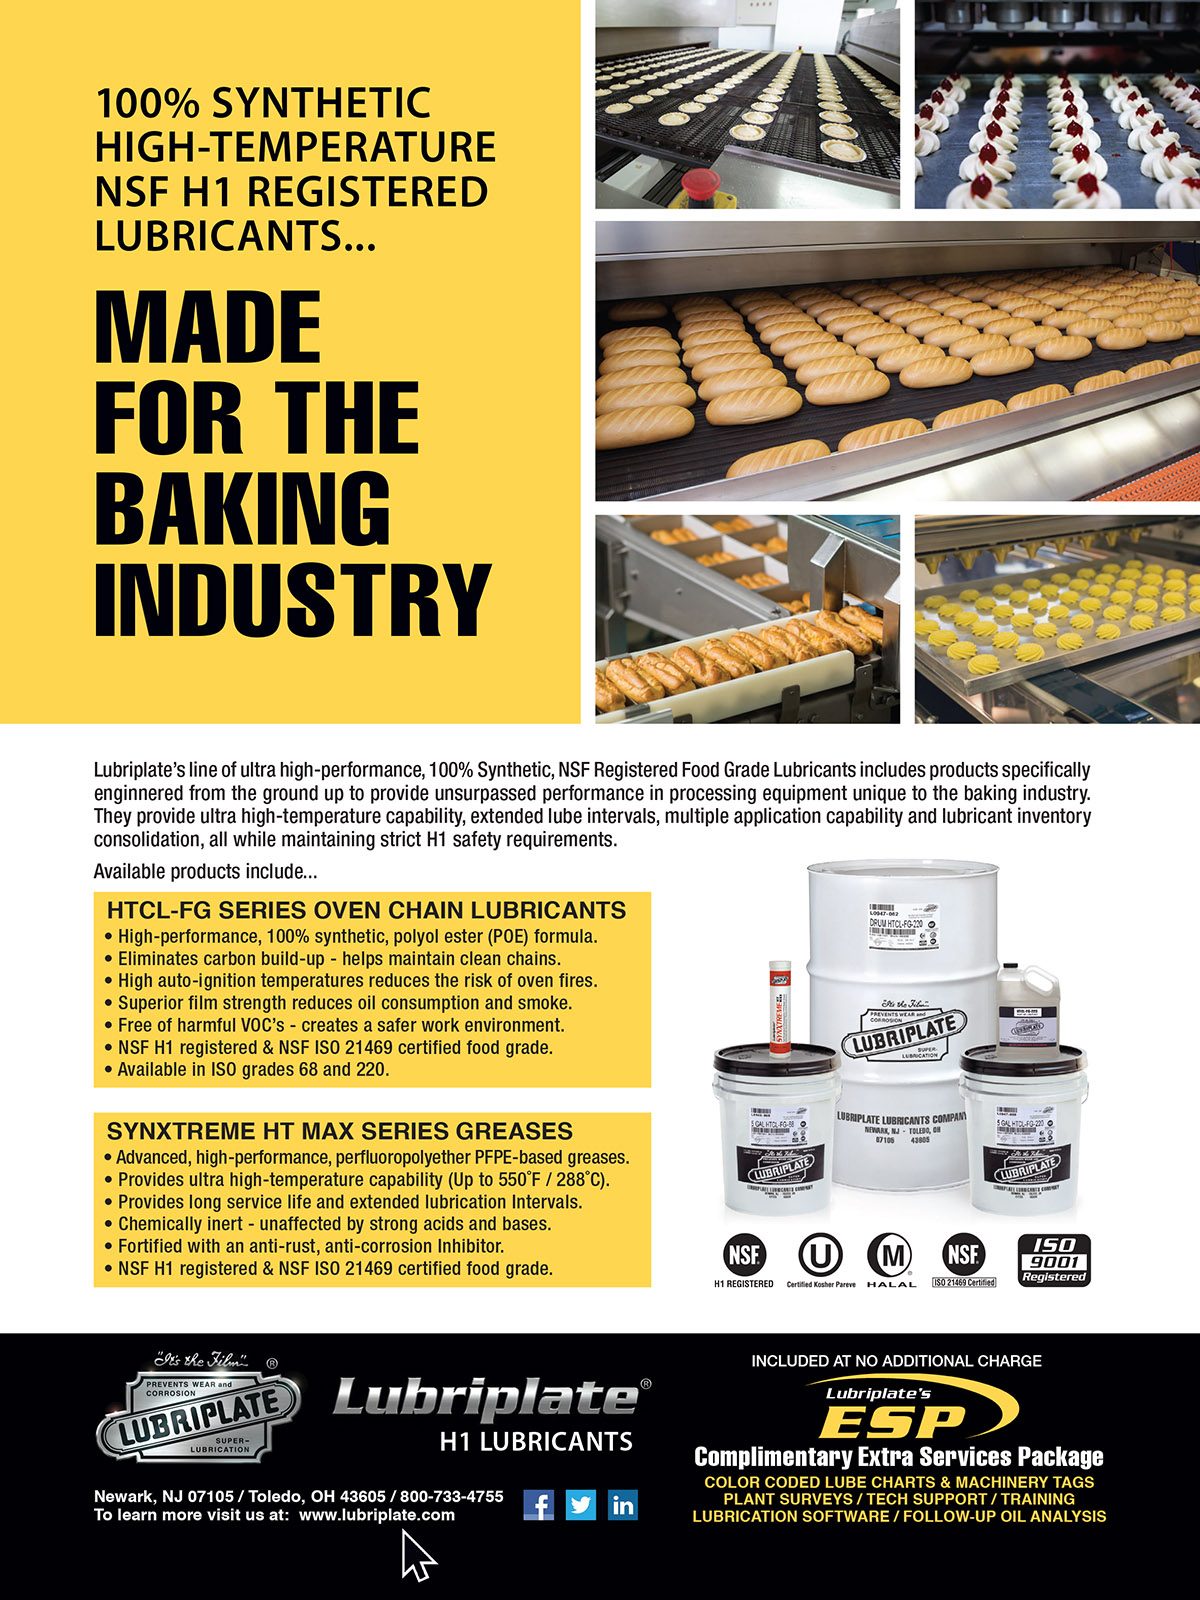 Full-page ad, Yellow, Photos of baked goods on equipment, Jars and buckets